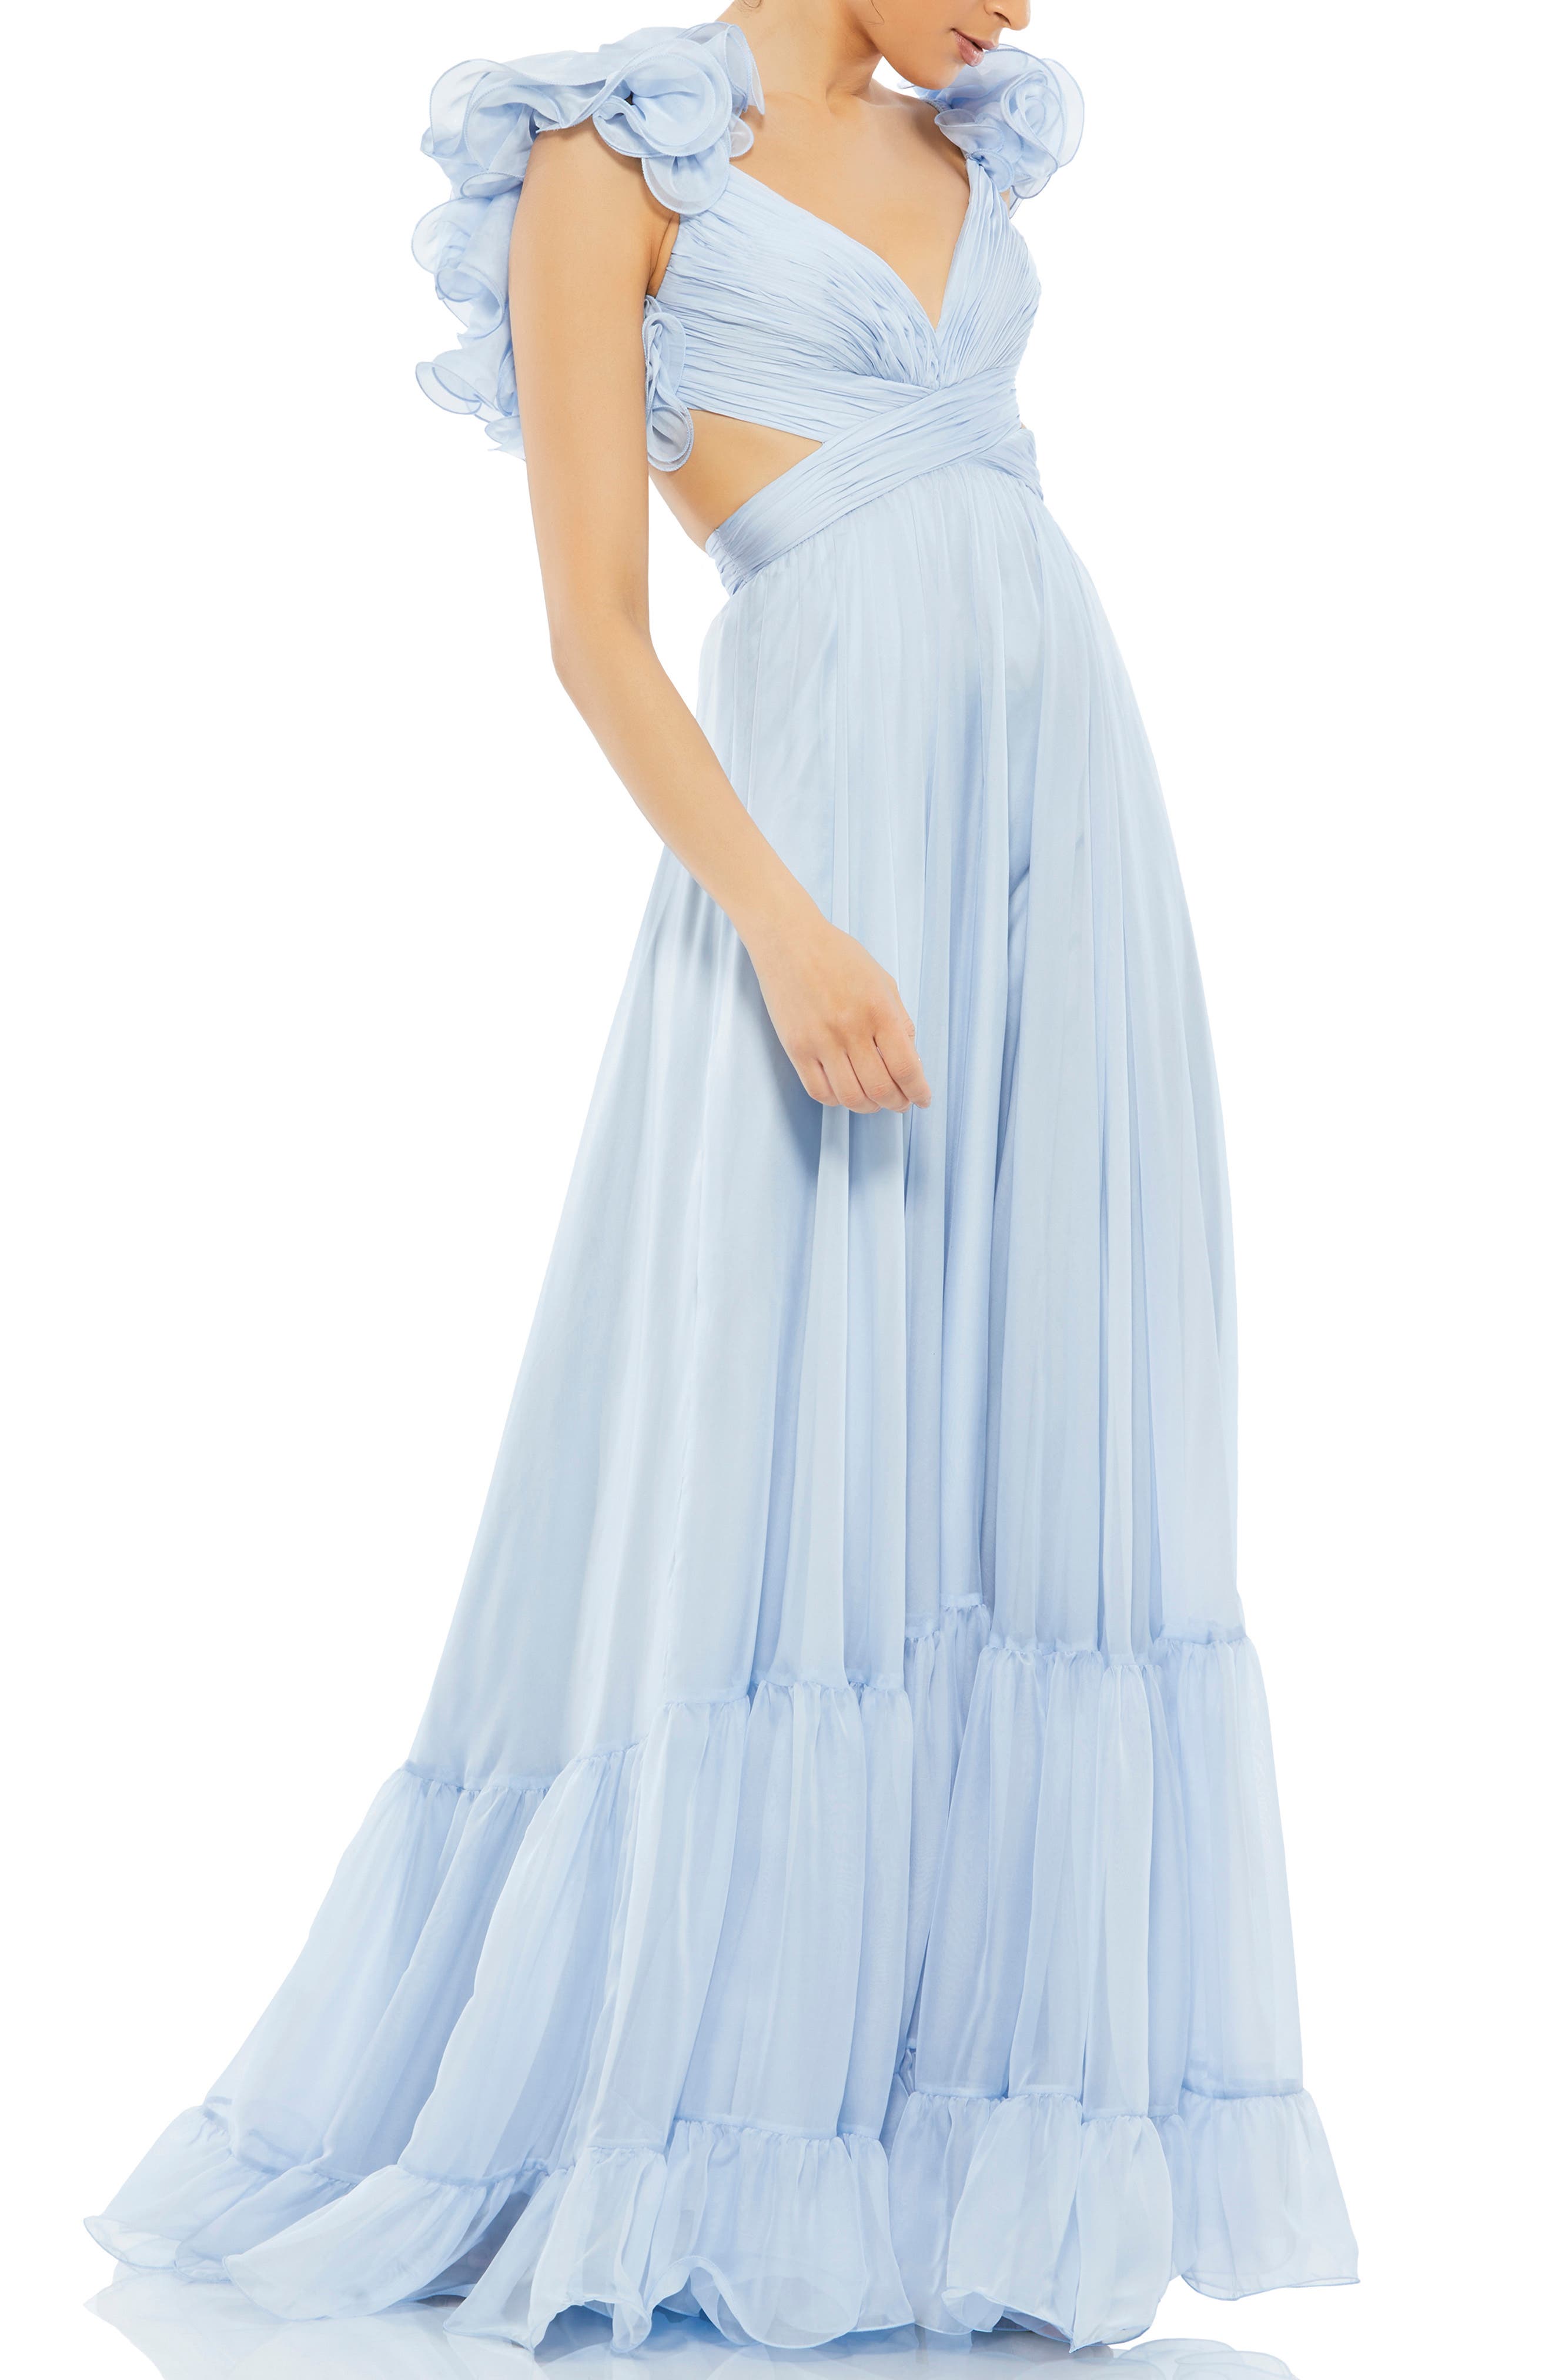 Blue Formal Dresses ☀ Evening Gowns ...